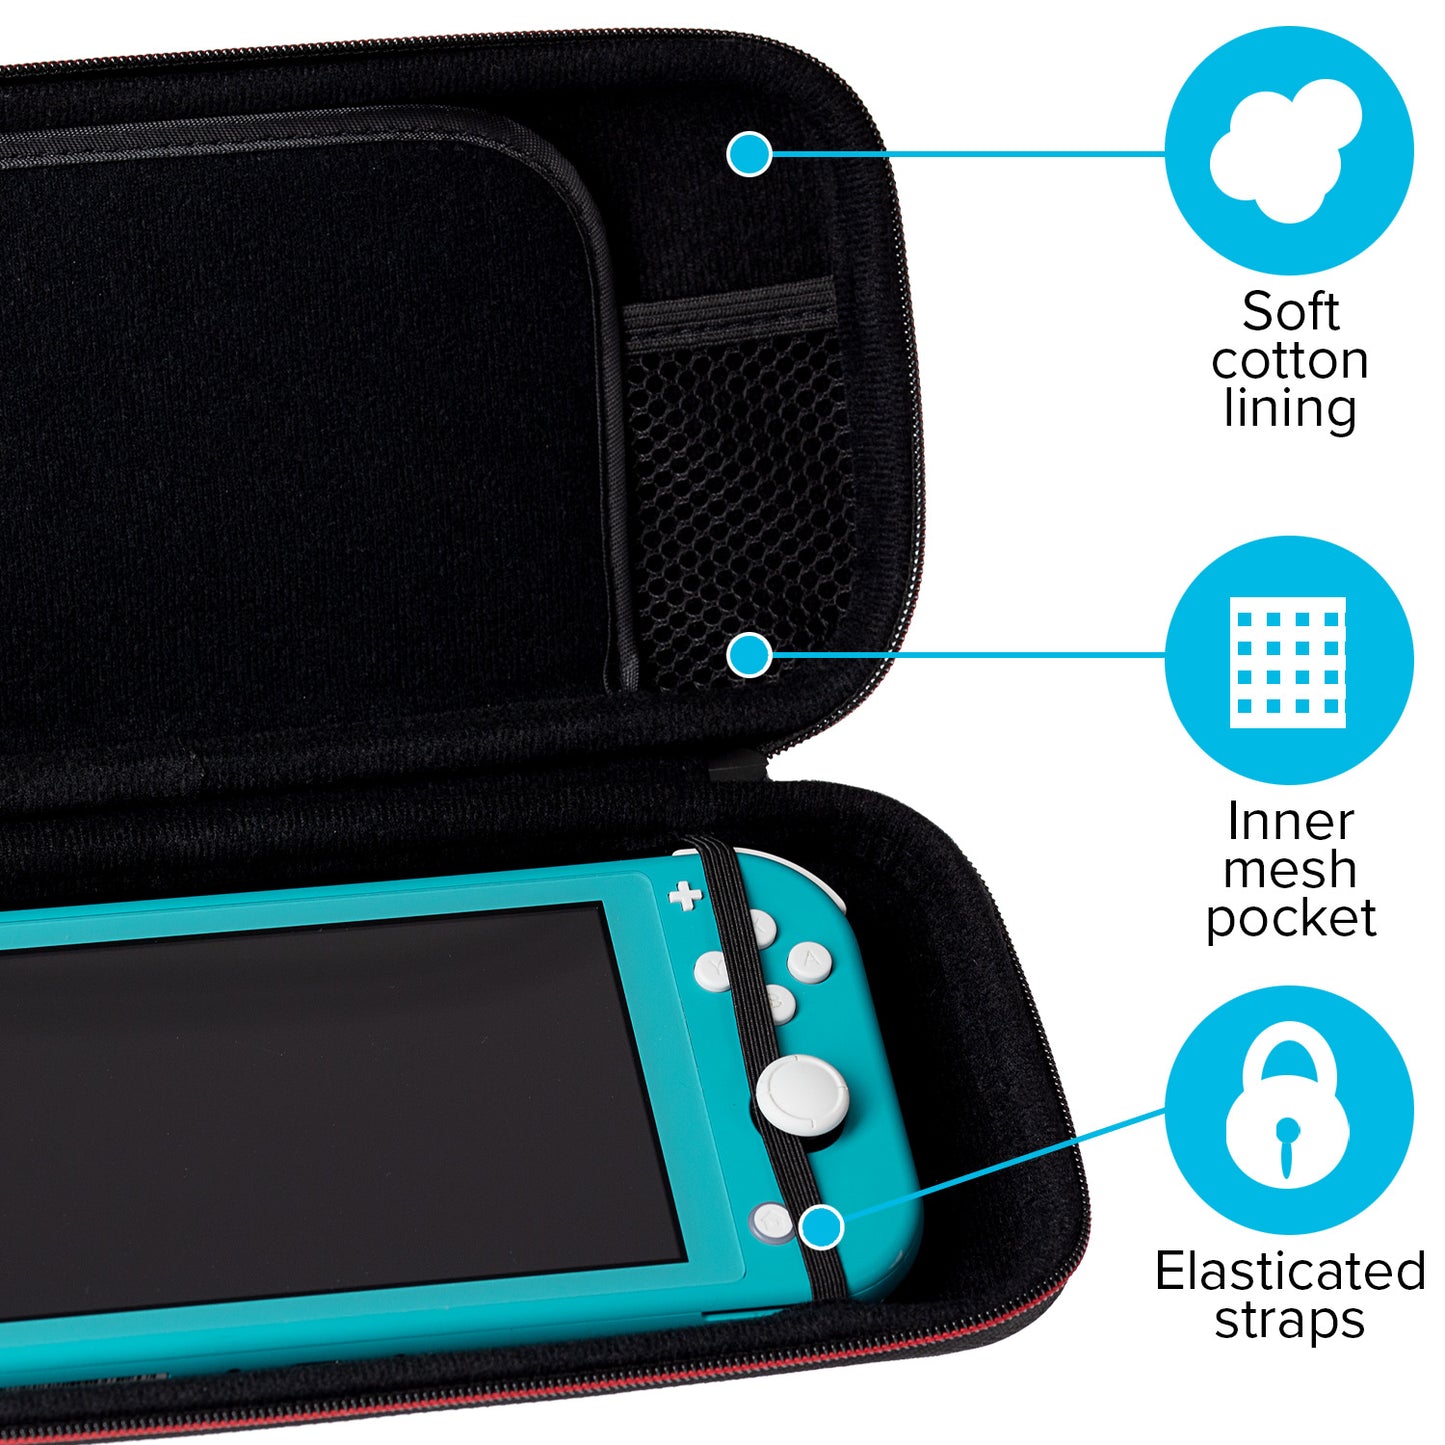 Maplin Hard Case and Cable Kit for Nintendo Switch with Earphones - maplin.co.uk